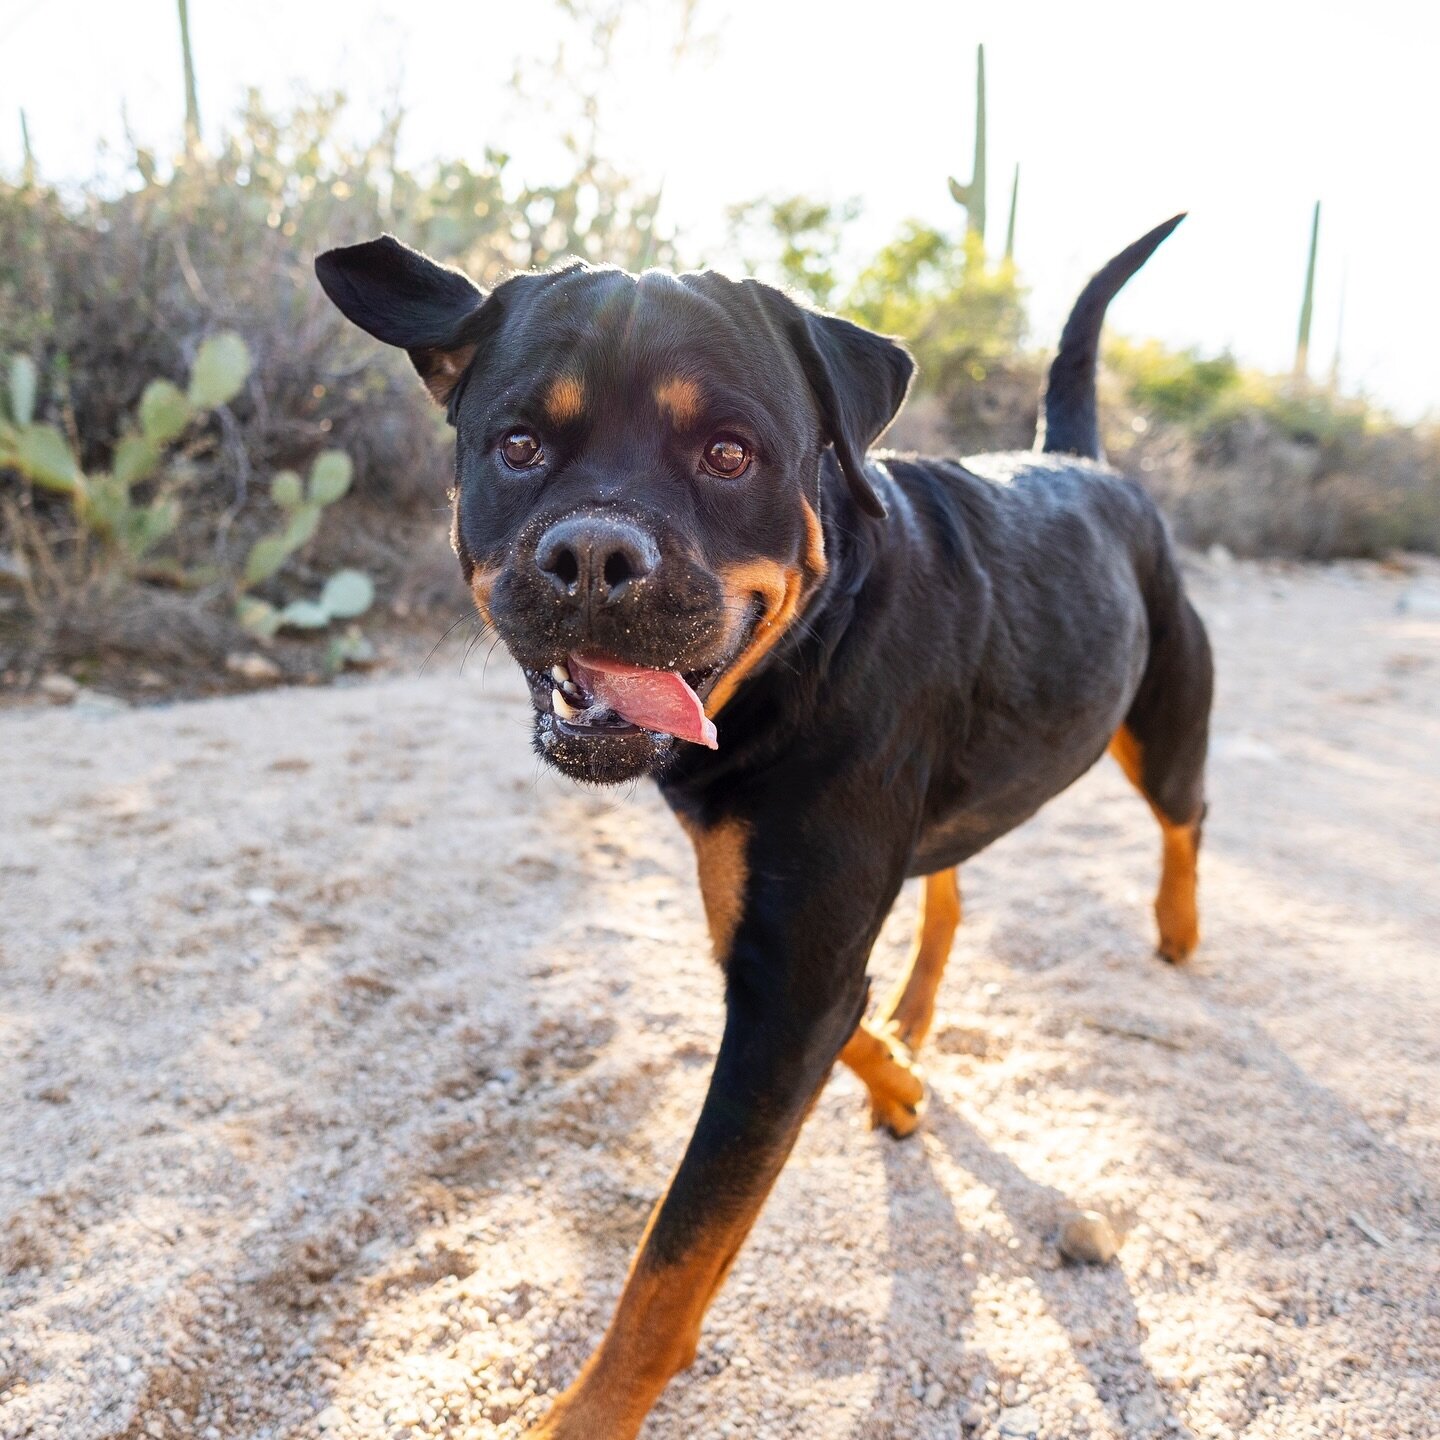 Tongue out, ears floppin&rsquo;, running free, and sand dusting her nose. 🐶 Meet Sora&hellip;the goofy, smart Rottie living her best life on a special trip to Tucson to celebrate her mom&rsquo;s birthday. Is the AirBnB dog friendly? ✅ Does the resta